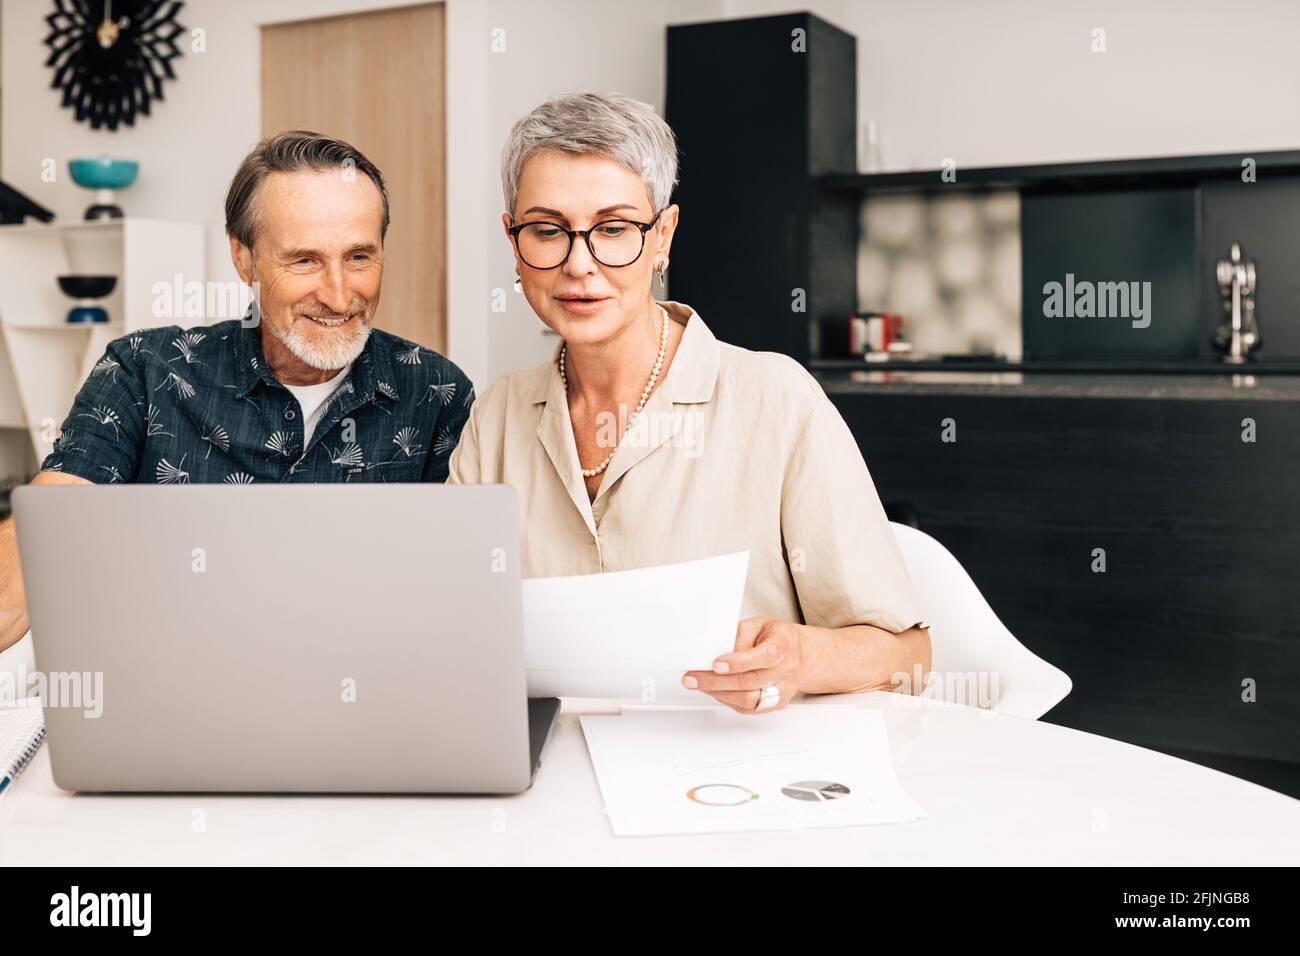 Senior retired couple at a table in dining room using a laptop computer. Two mature people looking at paperwork and discussing their finances. Stock Photo